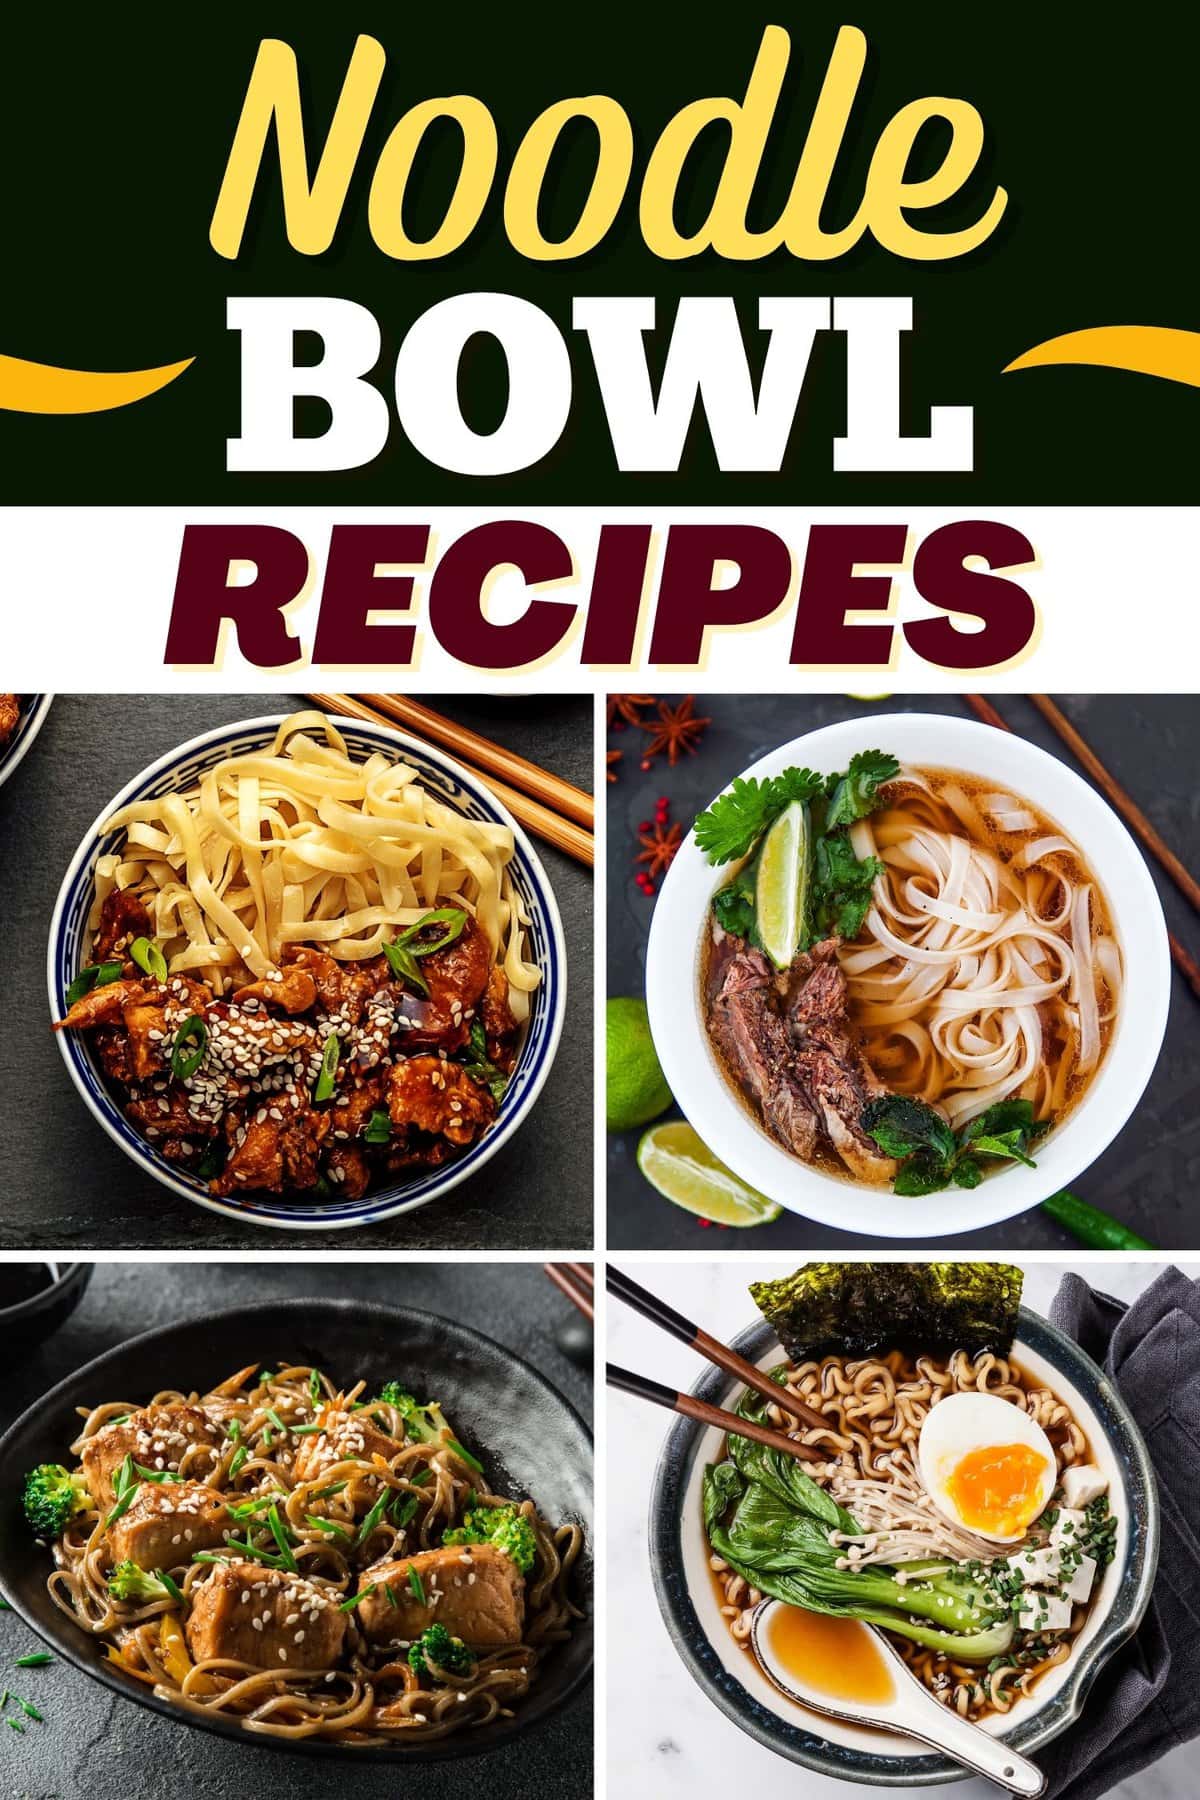 25 Best Noodle Bowl Recipes You’ll Ever Try - Insanely Good